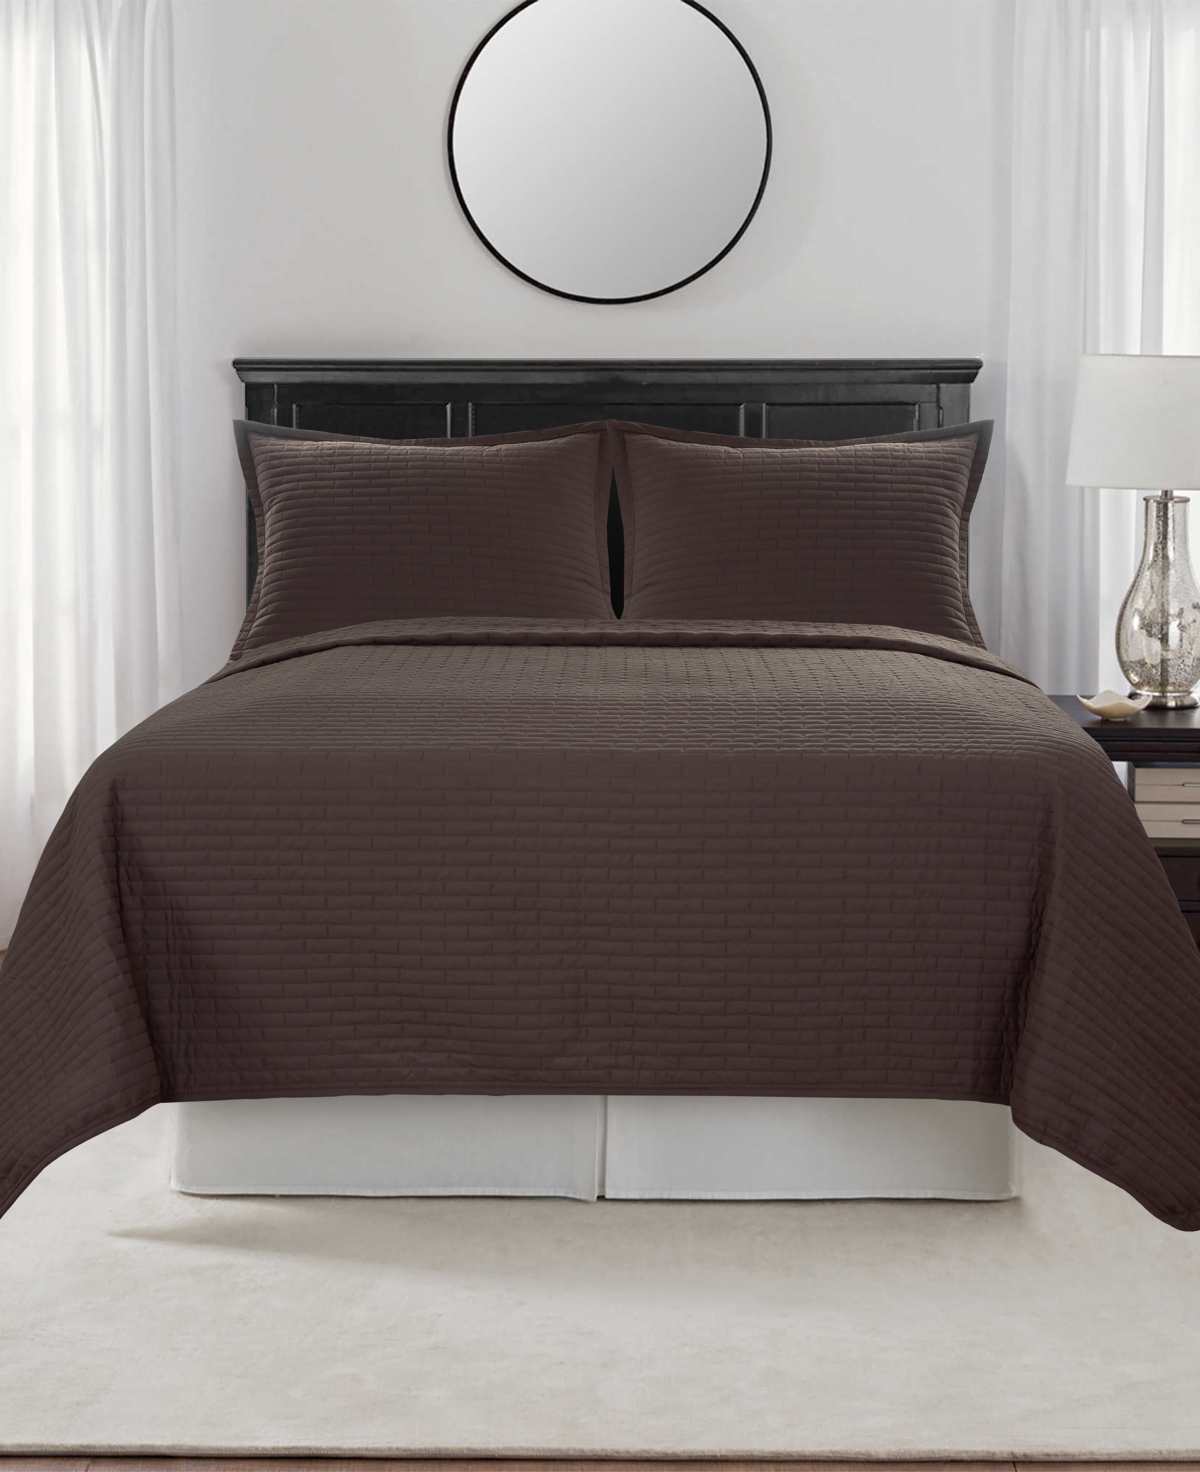 Videri Home Brick Quilted Coverlet, Full/queen In Brown